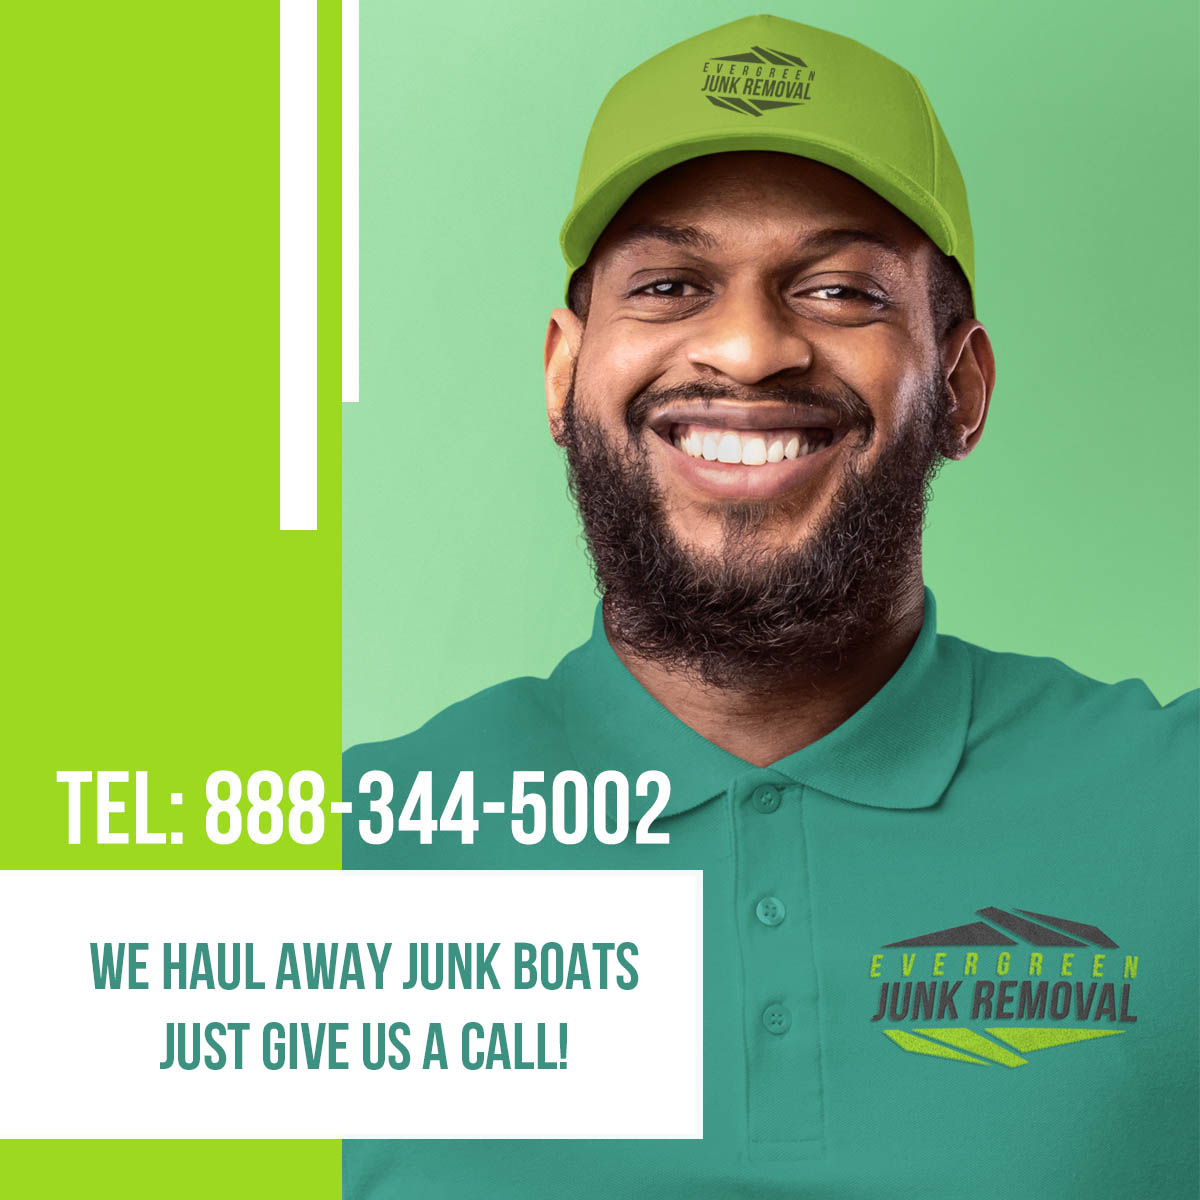 Boat Removal Company San Diego